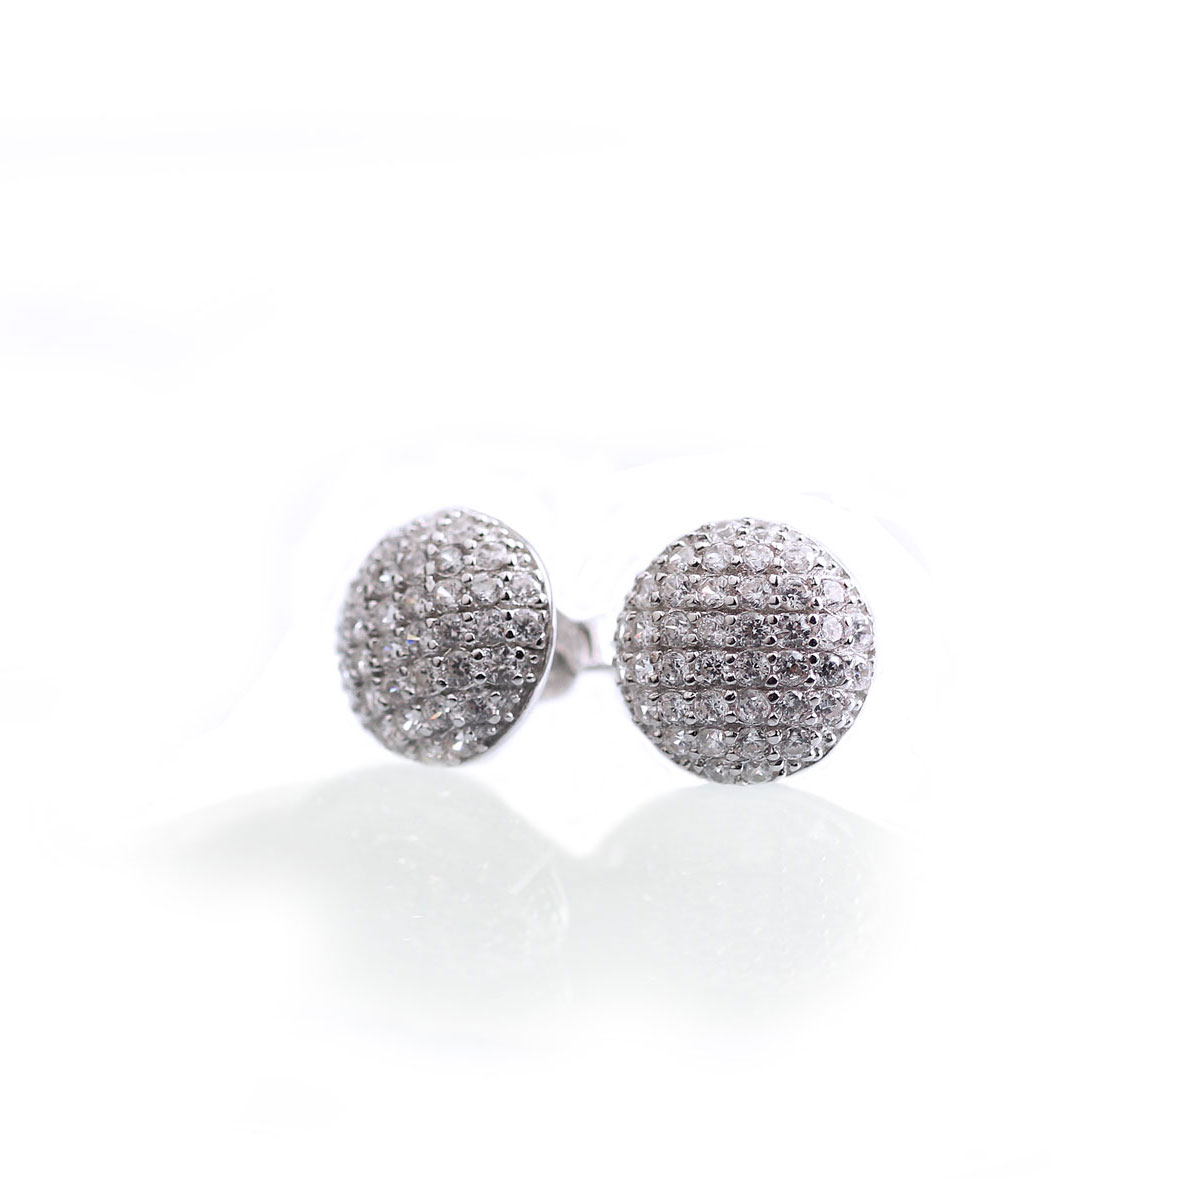 Cashs Ireland, Crystal Pave Sterling Silver Button Pierced Earrings, Pair